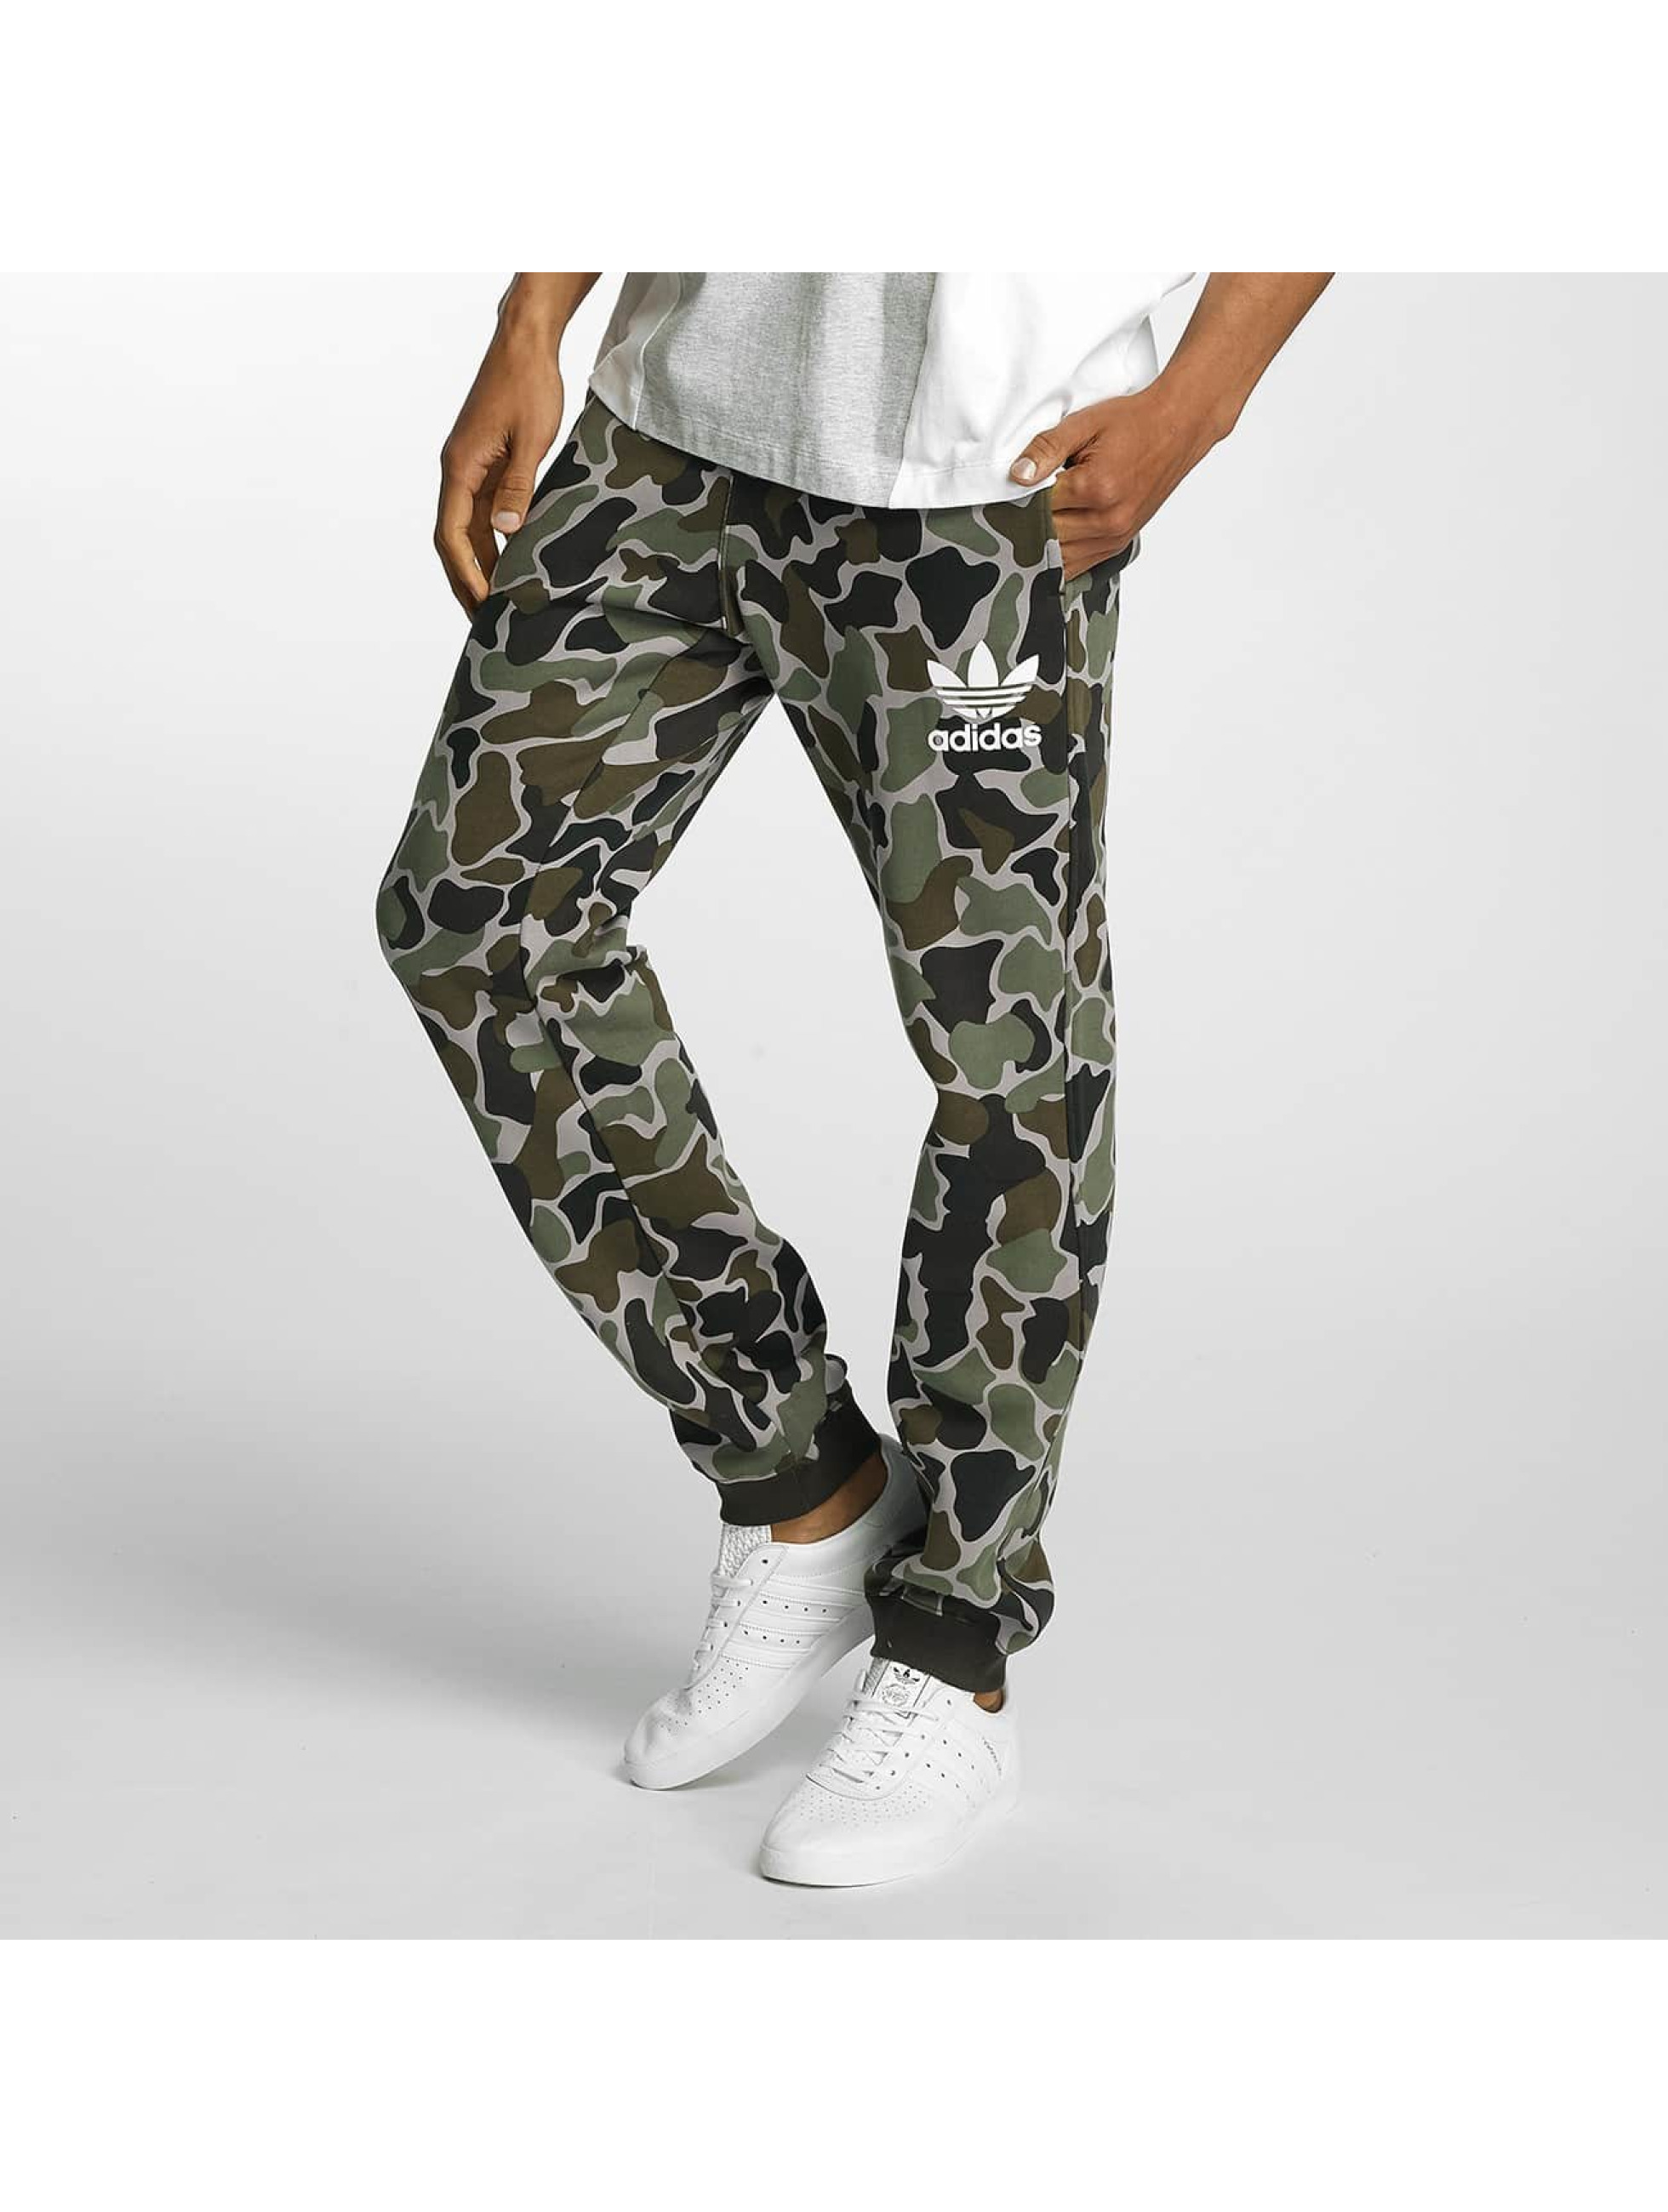 adidas Camo camouflage Jogging homme